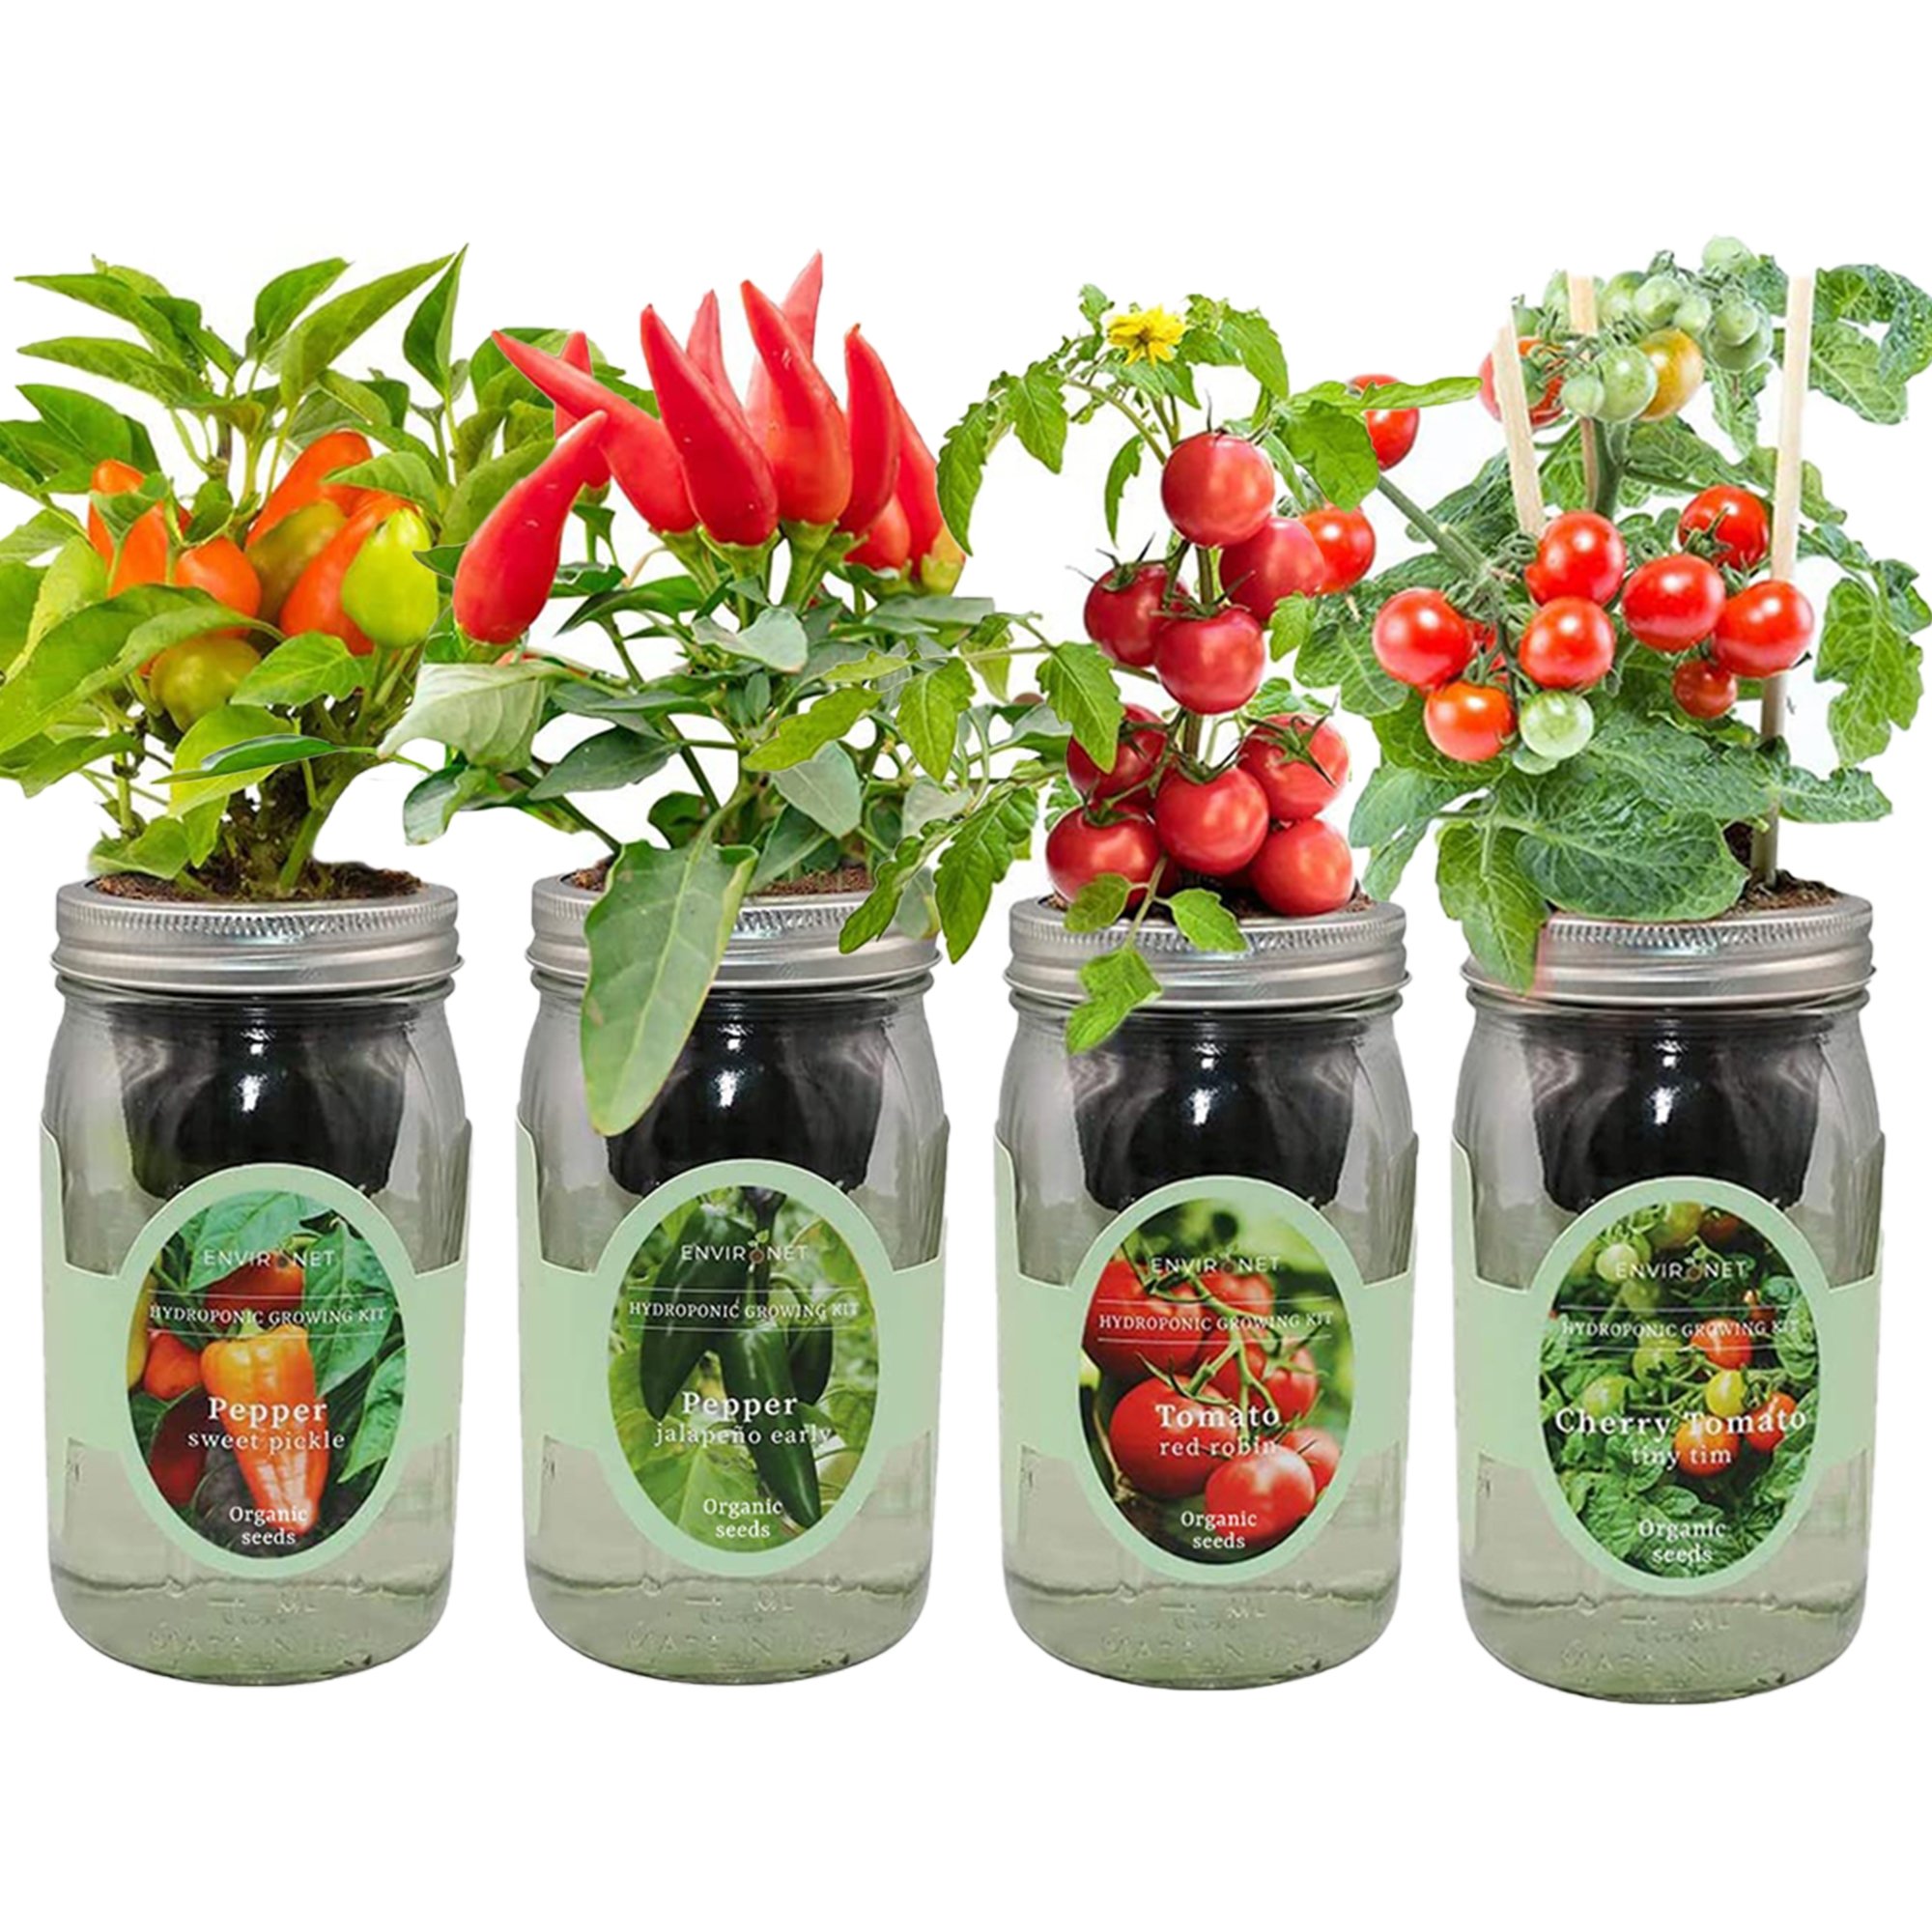 Hydroponic Veggie Growing Kit Garden Bundle with Organic Seeds - Two Tomatos, Two Peppers